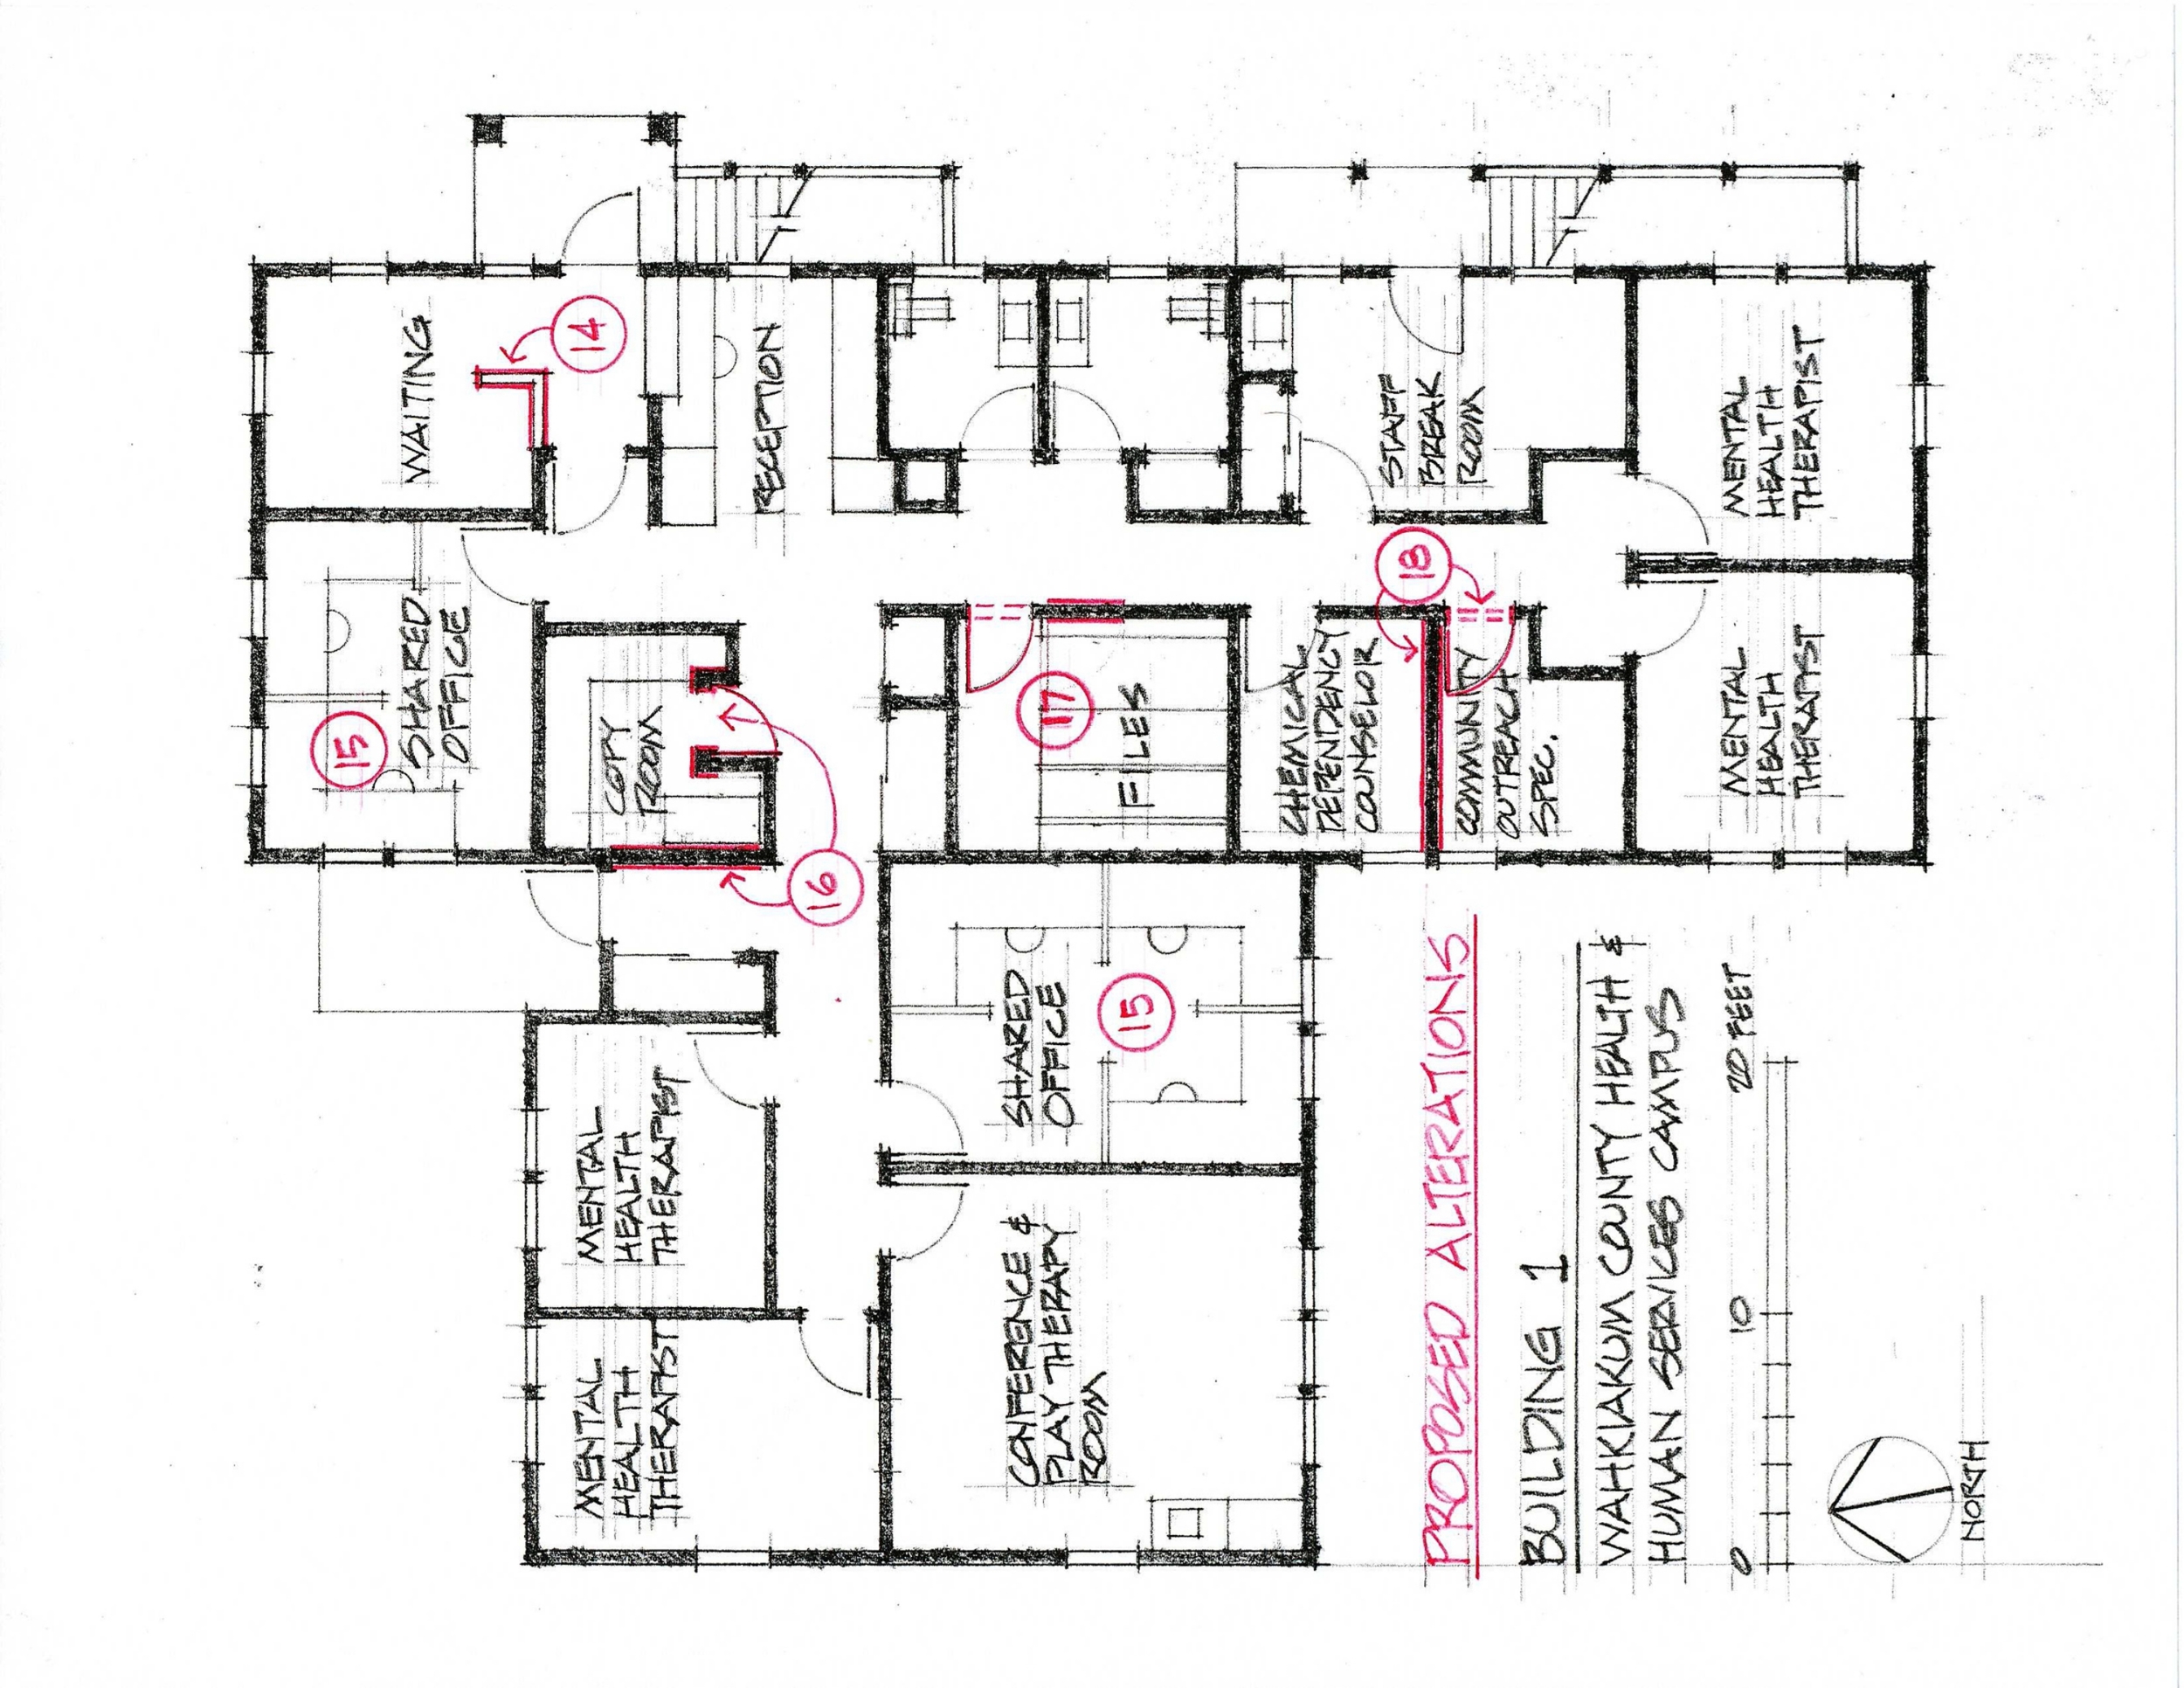 H&HS Facilities Proposed Alterations Drawings12.01.jpg